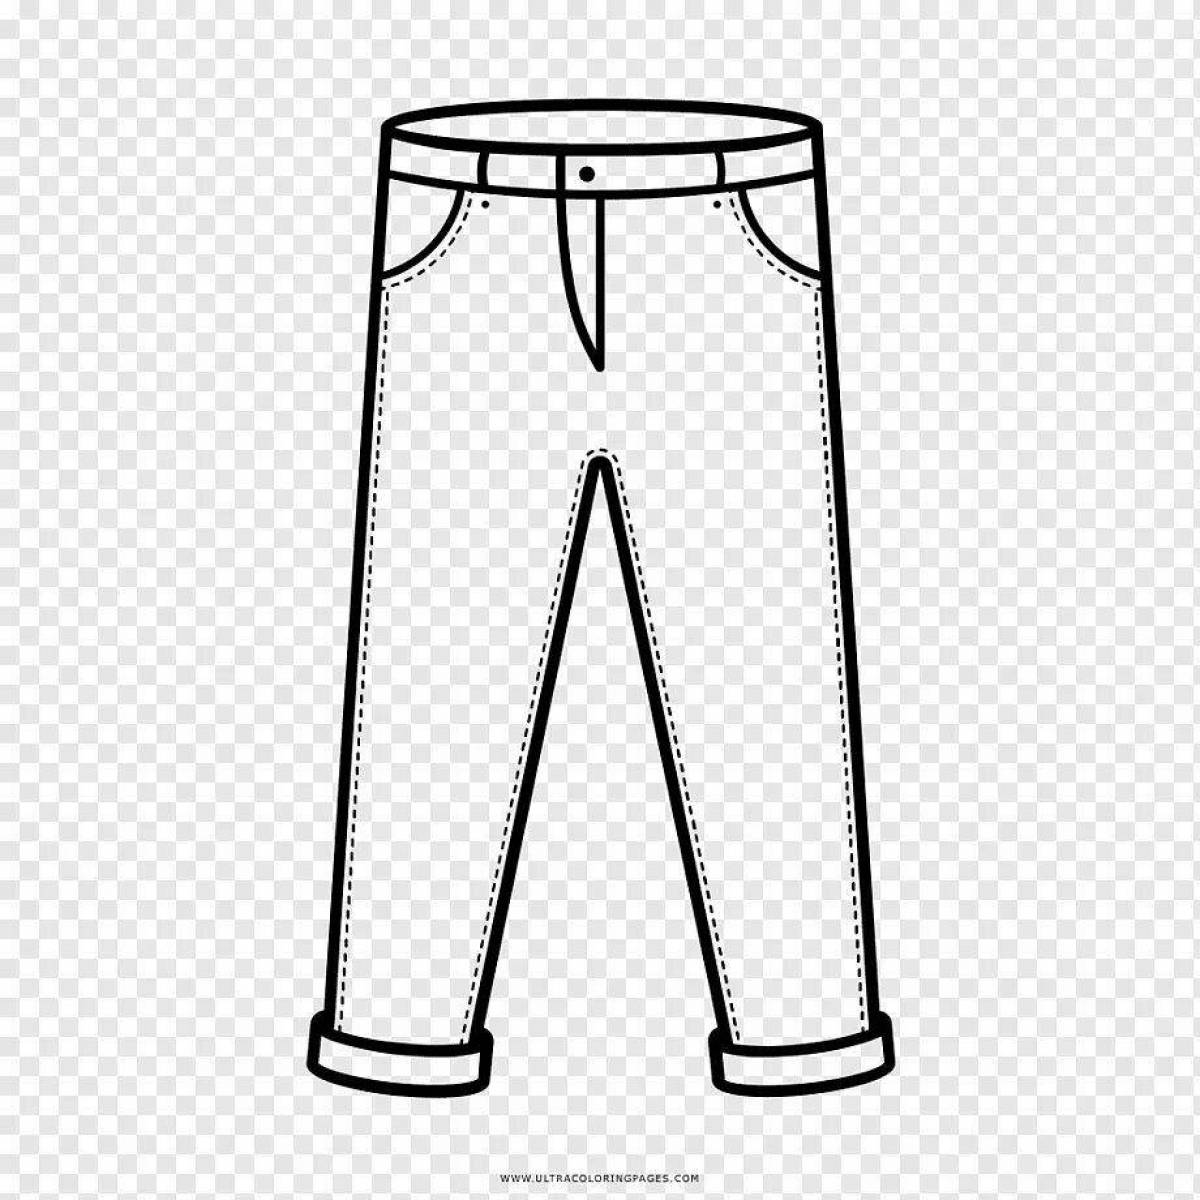 Fashion pants coloring book for kids